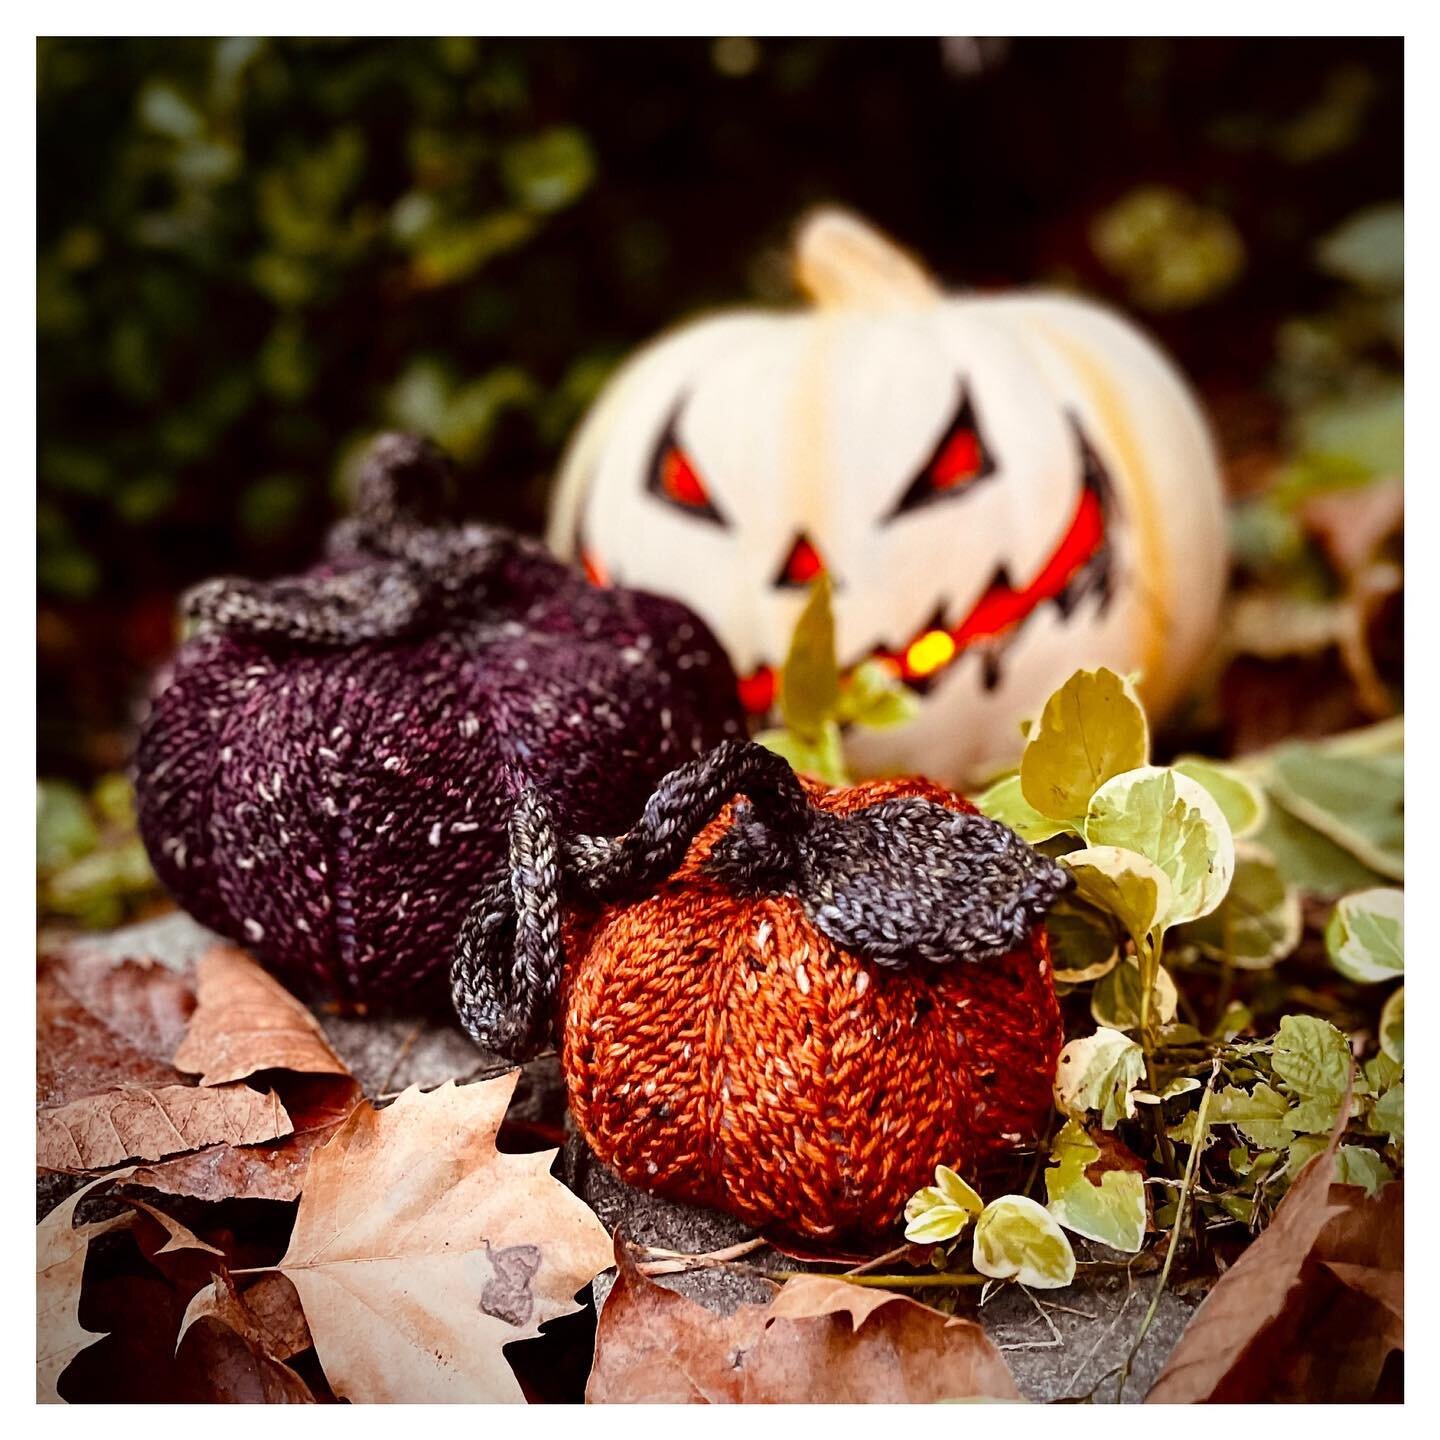 I definitely am excited for this #halloween 🎃 Our house is decorated inside &amp; out &amp; I had to knit a couple more of these pumpkins. It&rsquo;s quite magical how quickly they knit up! Pattern by the talented wizard @nimbleneedlez on @hi.ravelr